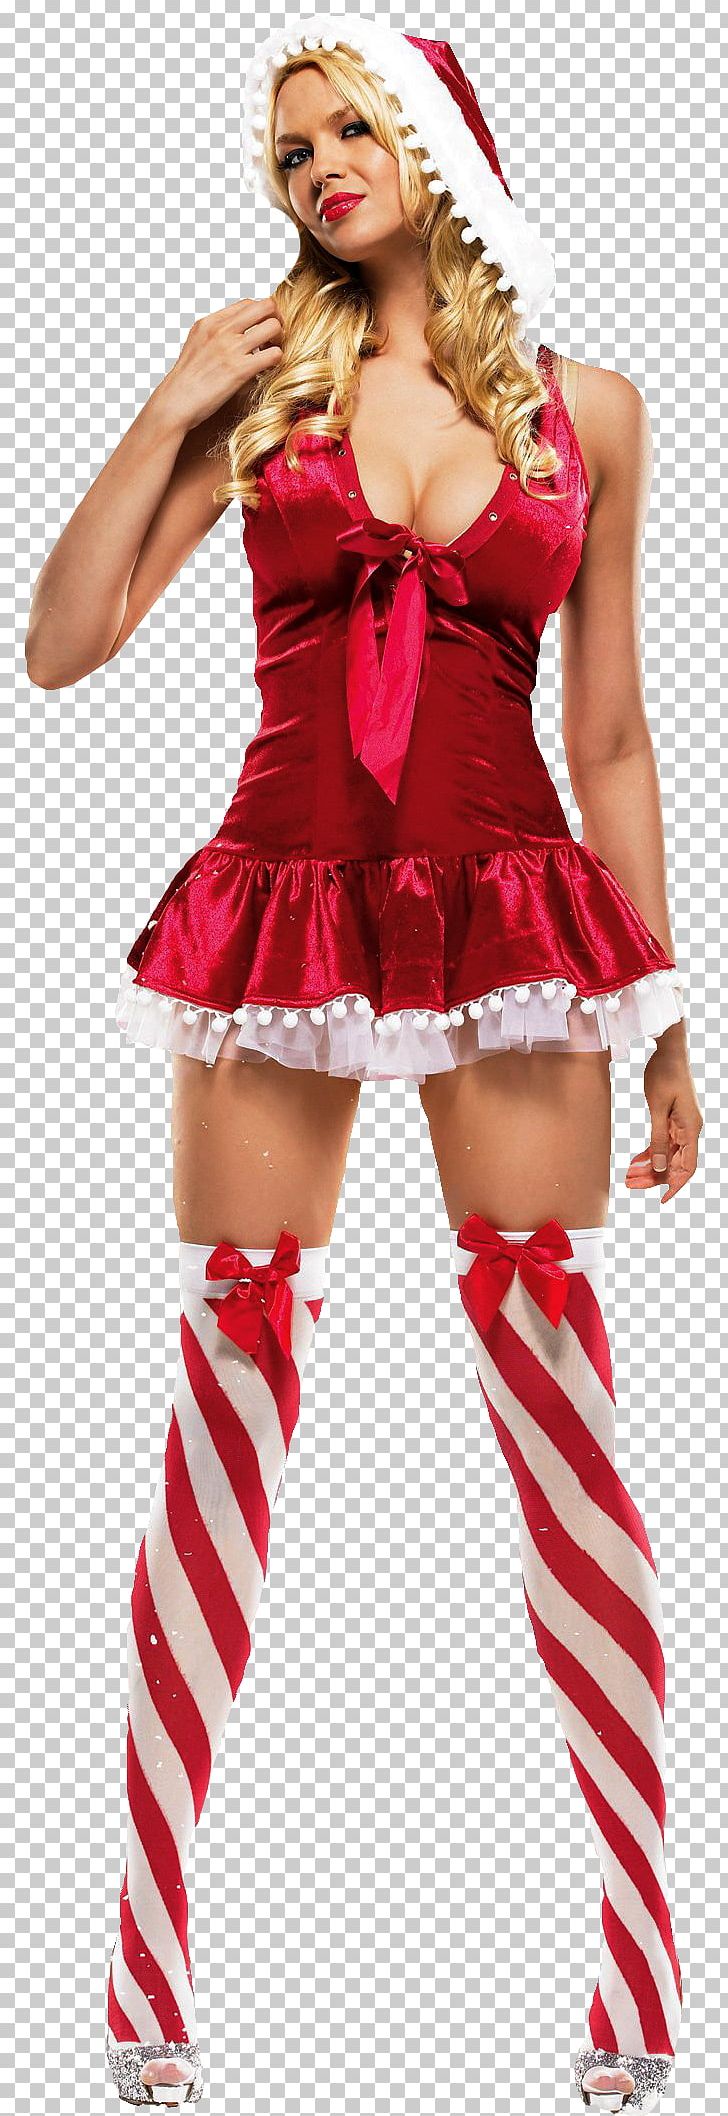 Mrs. Santa Claus Mrs. Claus Costume Santa Suit PNG, Clipart, Christmas, Clothing, Costume, Costume Design, Costume Party Free PNG Download